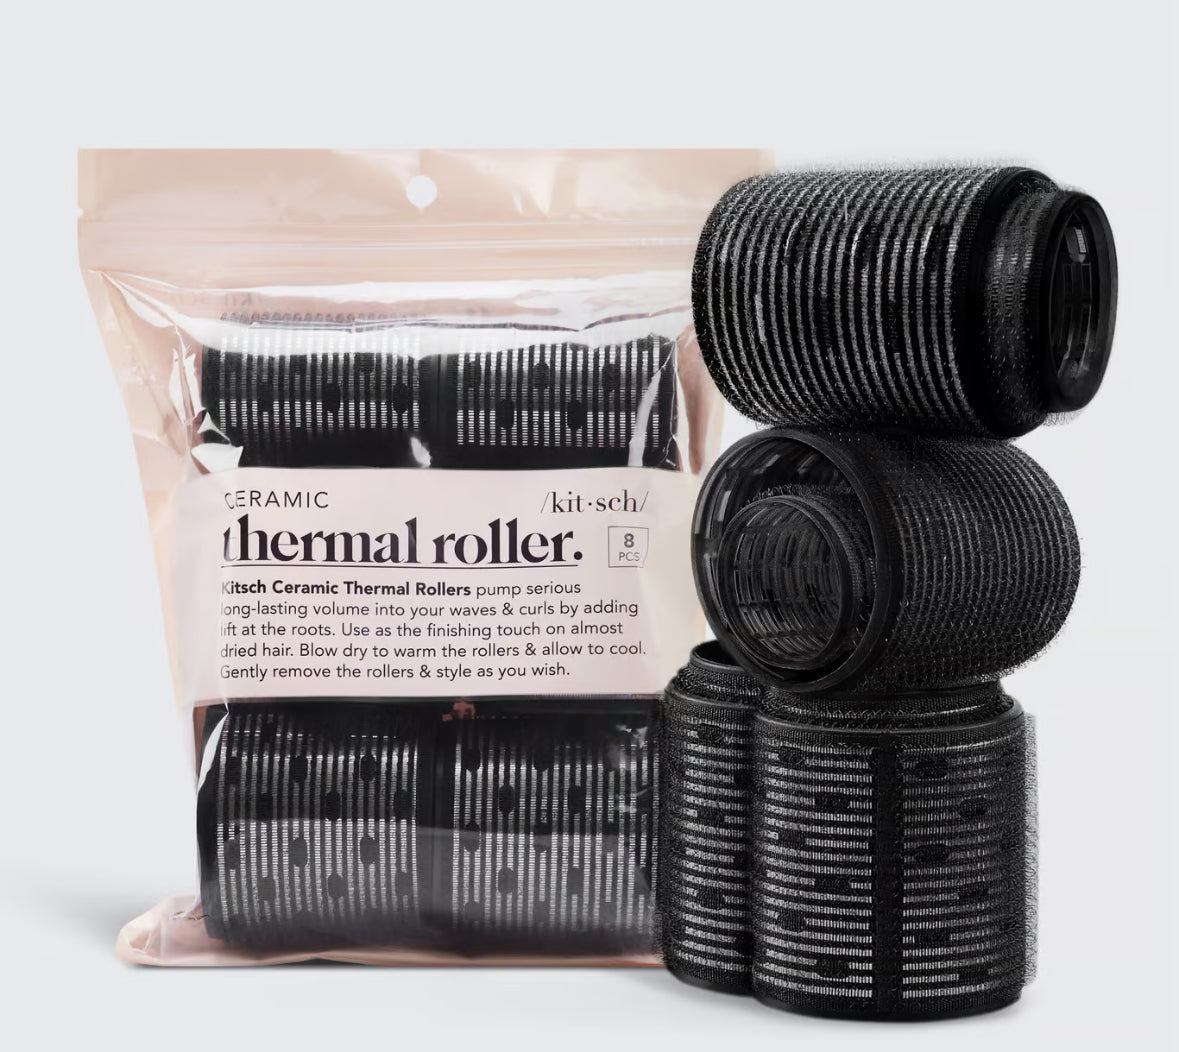 Kitsch Ceramic Thermal Rollers 8pcs